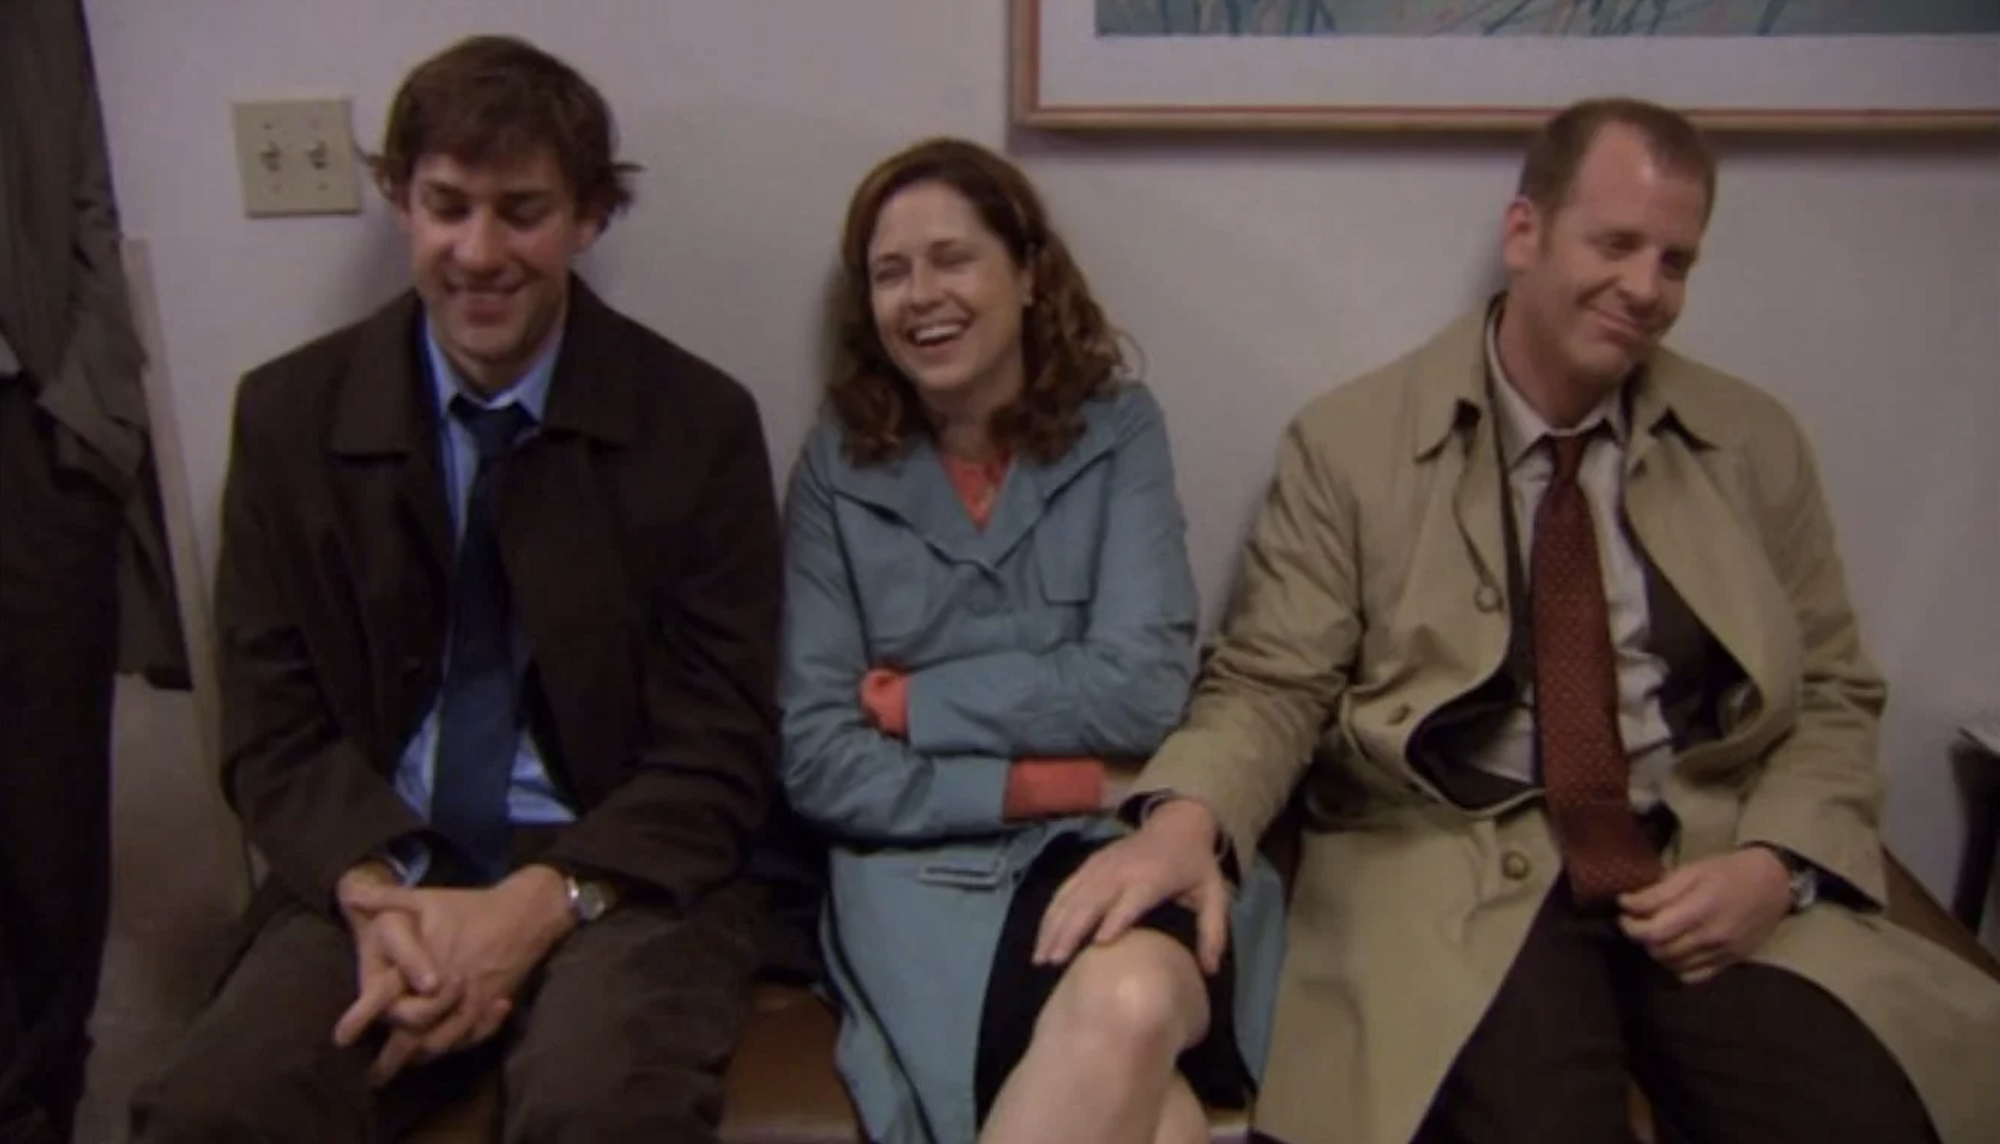 jim pam and toby sitting on a bench in dunder mifflin with toby&#x27;s hand on pam&#x27;s thigh